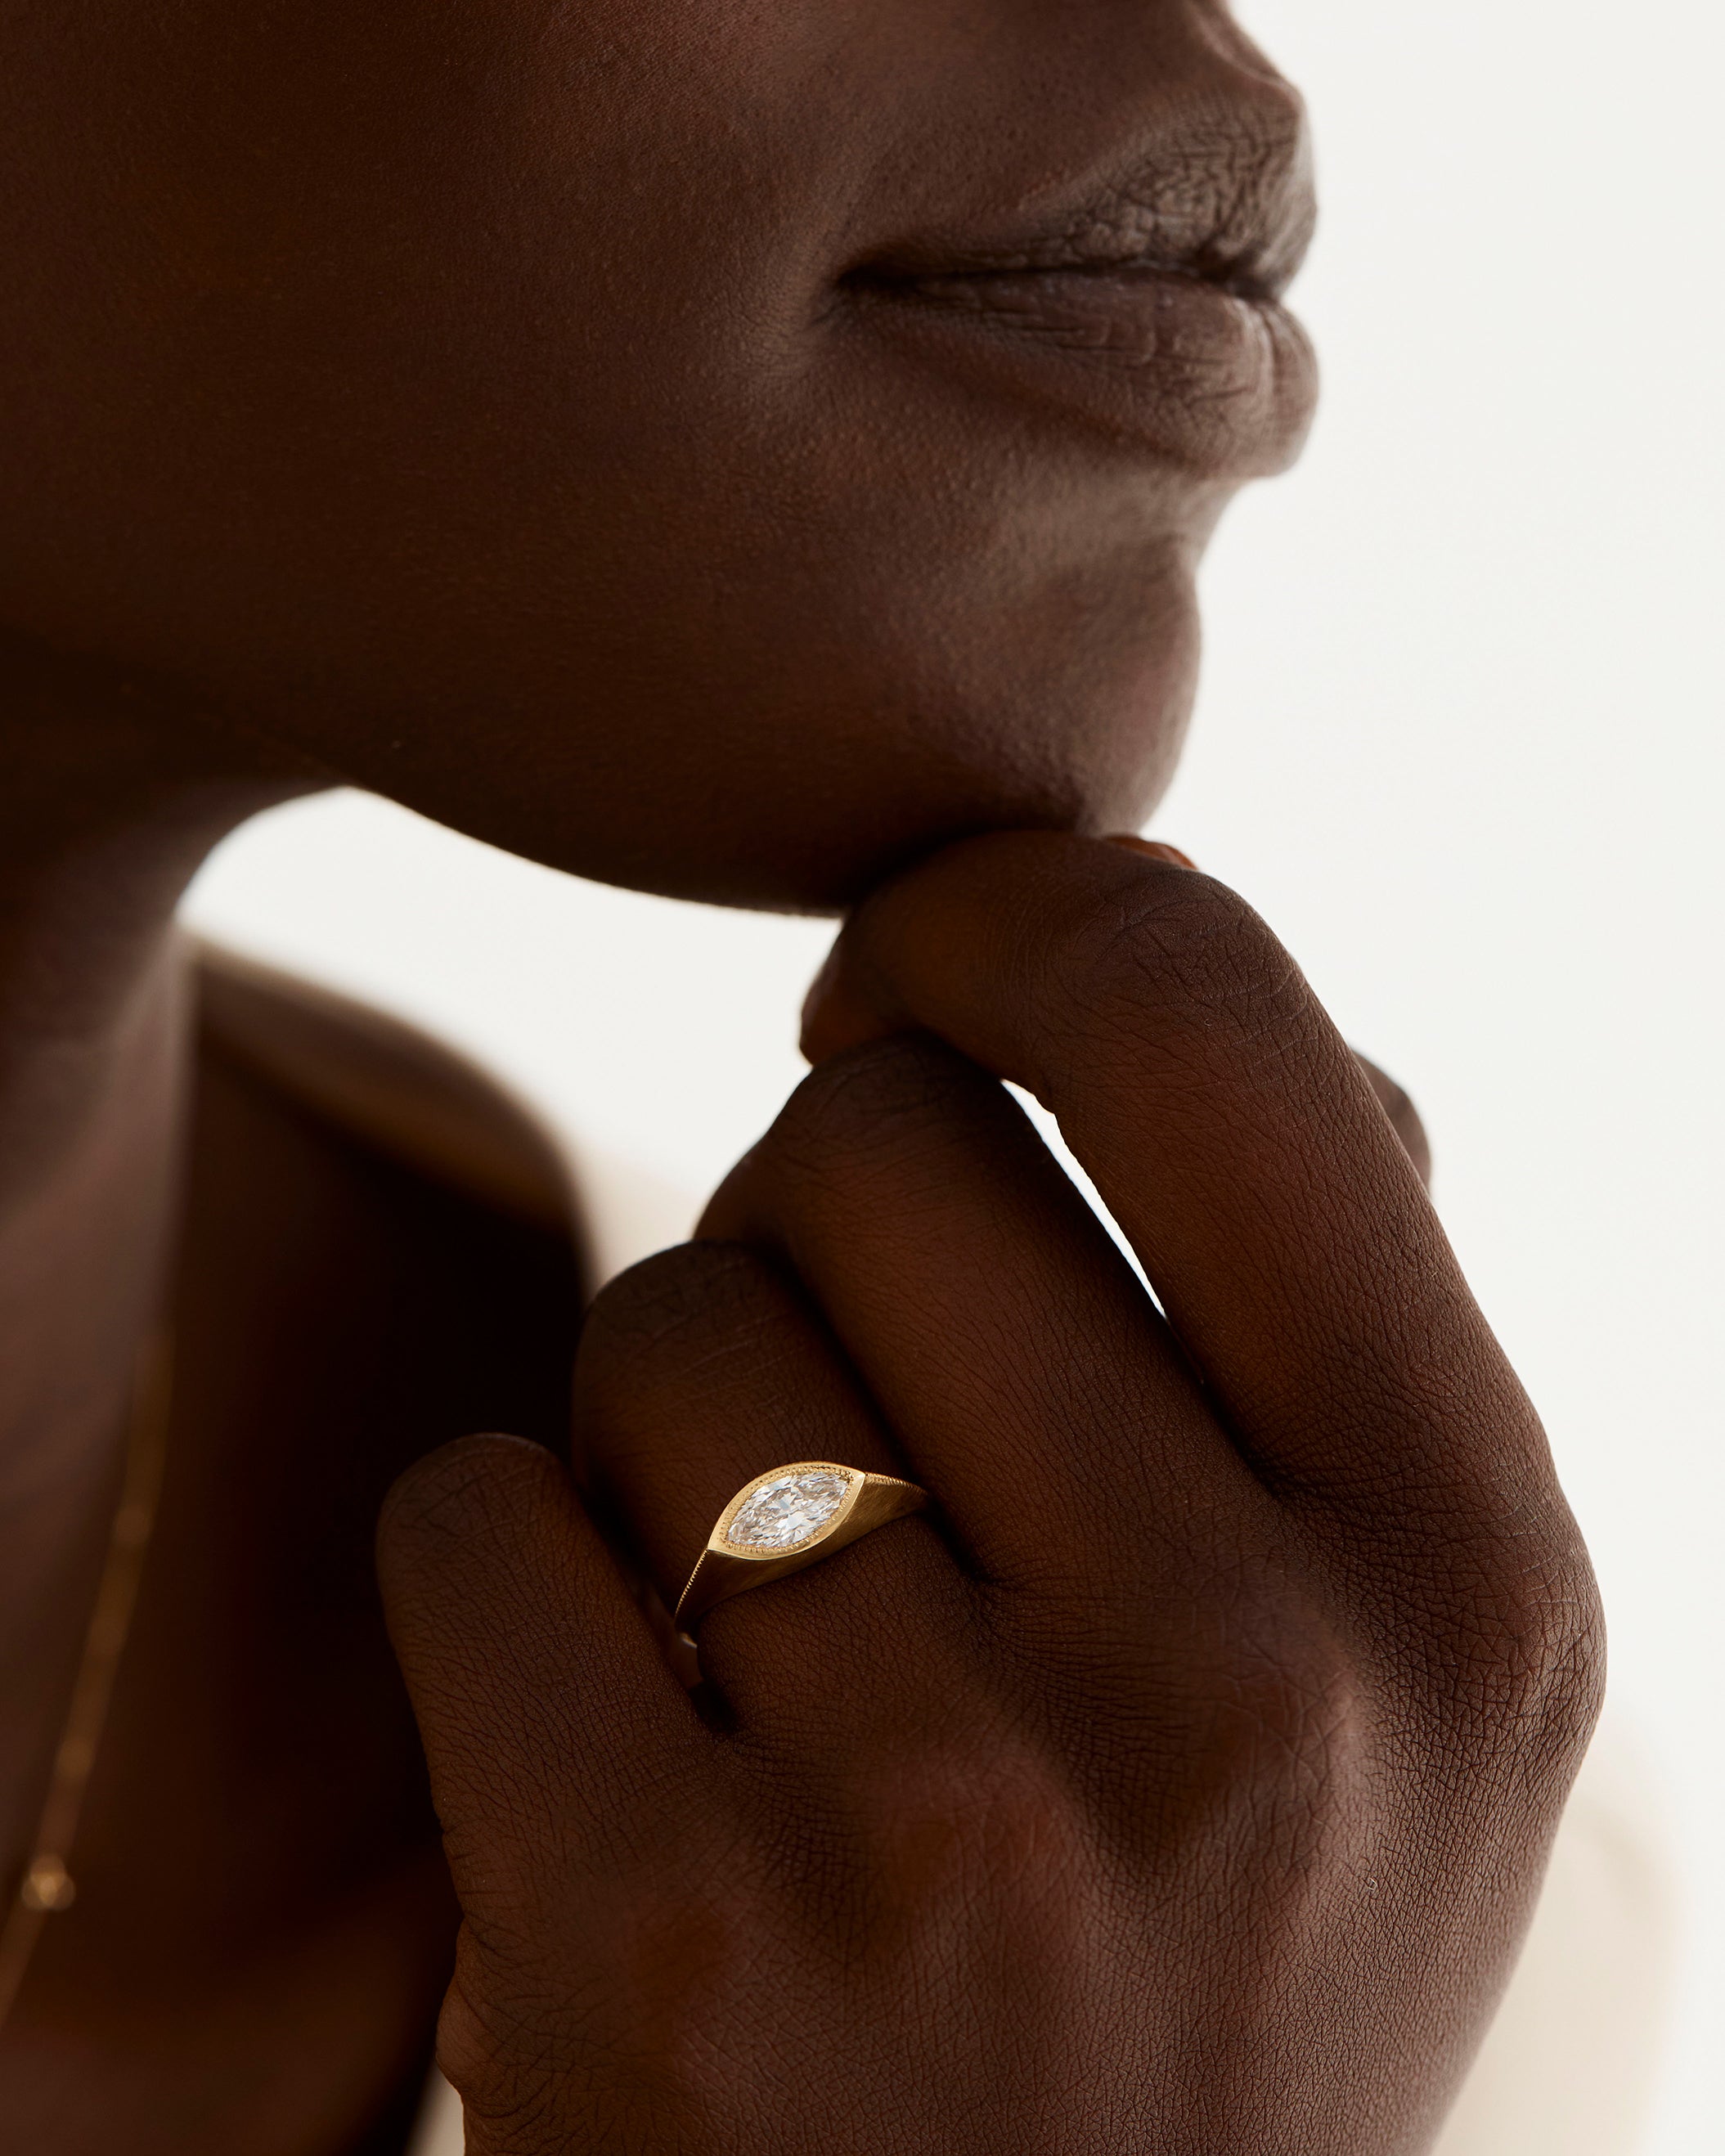 A model wears a marquise cut white diamond set in a traditional signet style